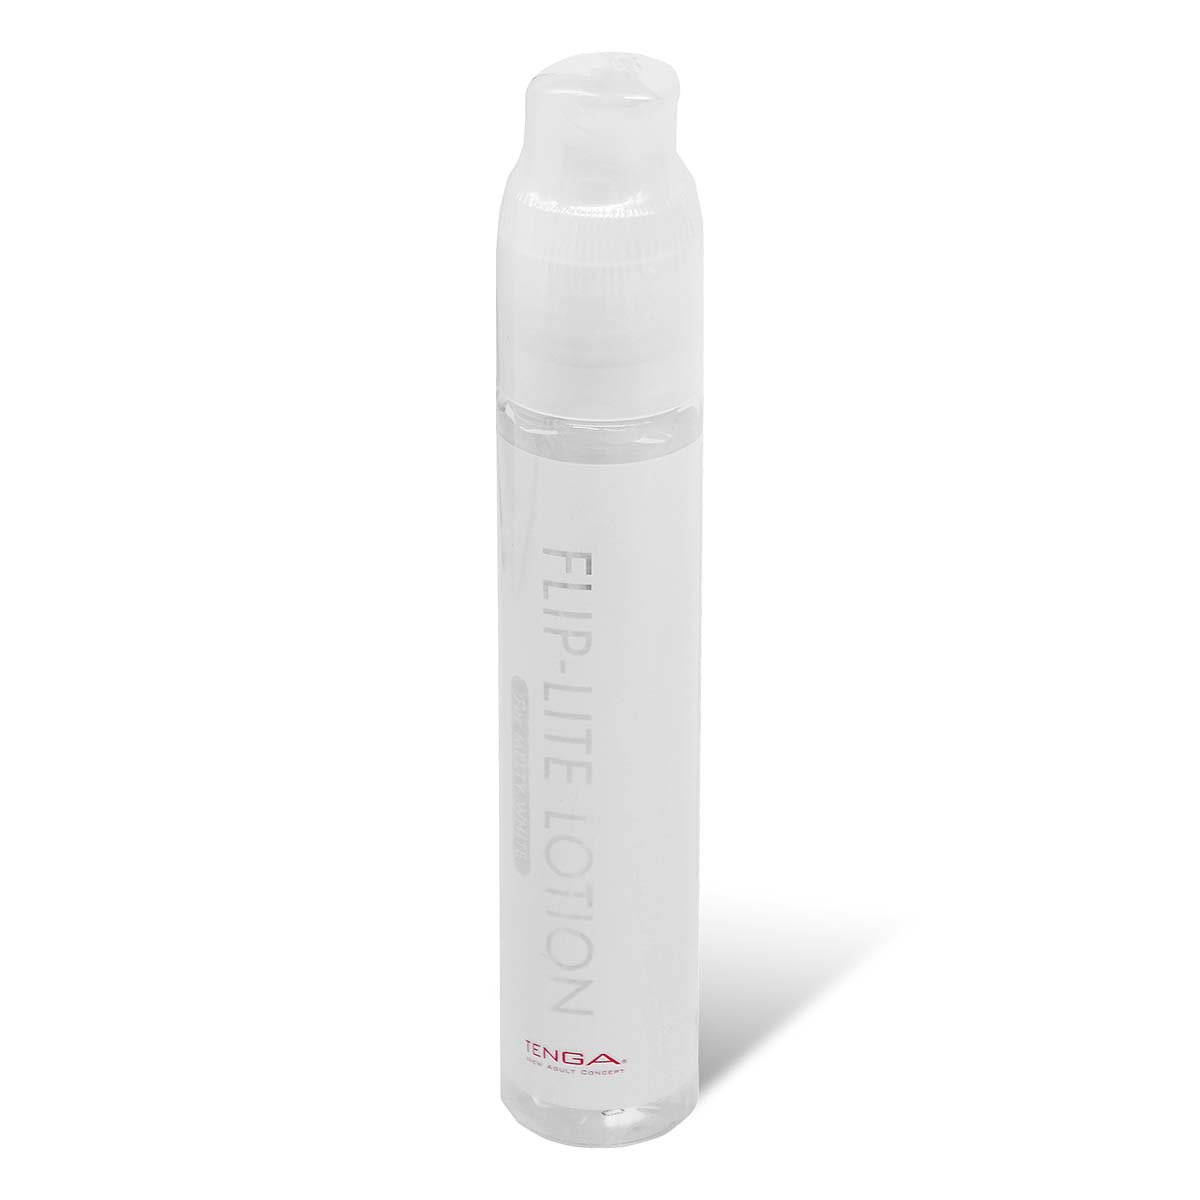 TENGA Flip-Lite Lotion (for Melty White) Water-based Lubricant-p_1